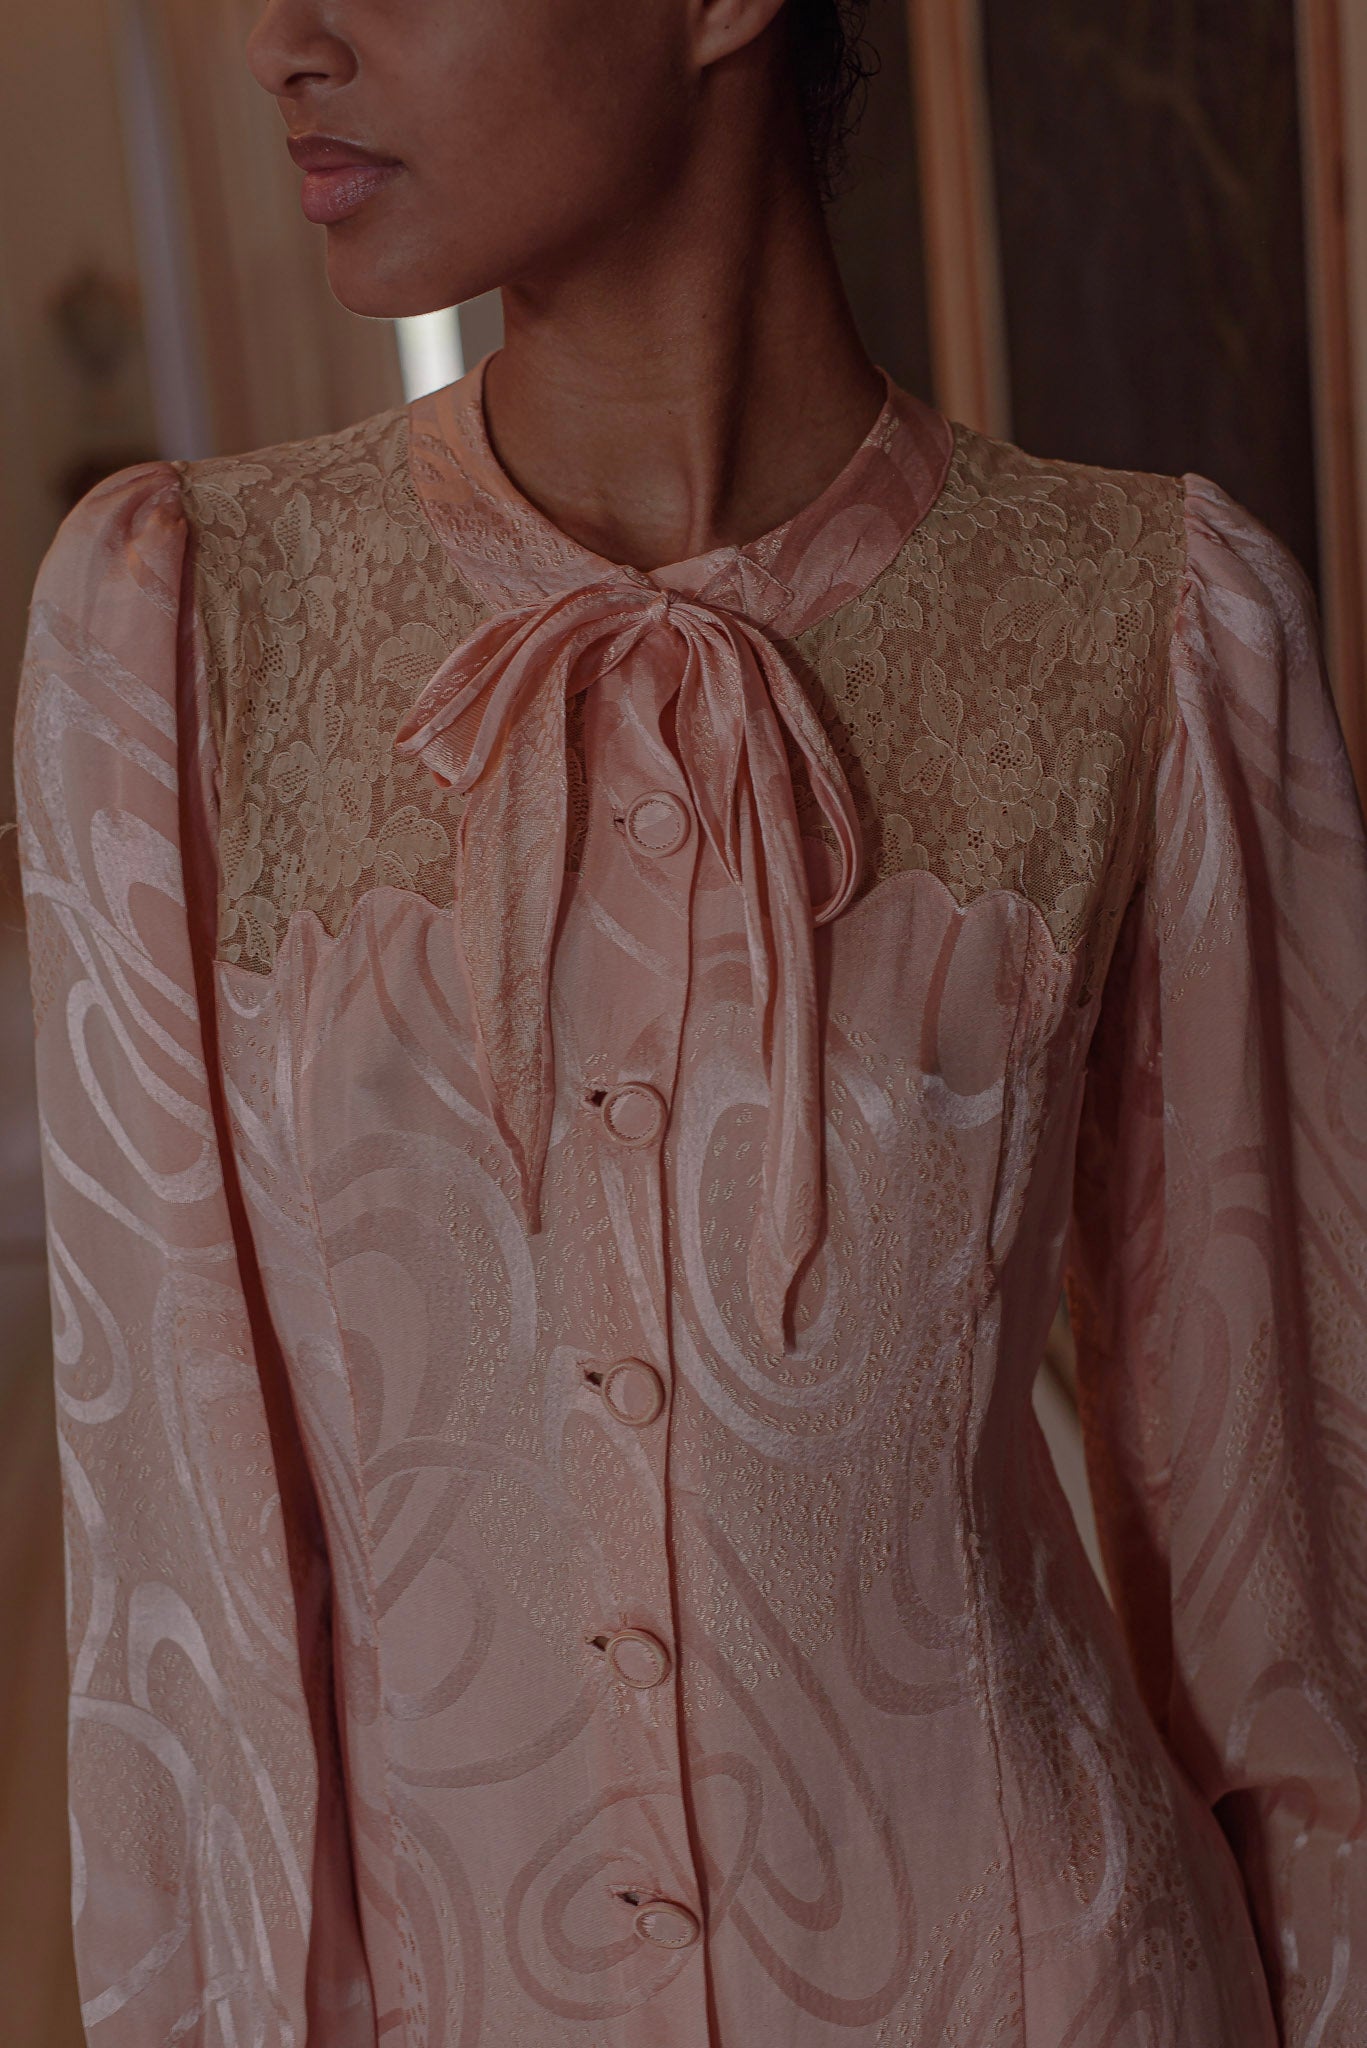 1930s French damask silk lace nightgown